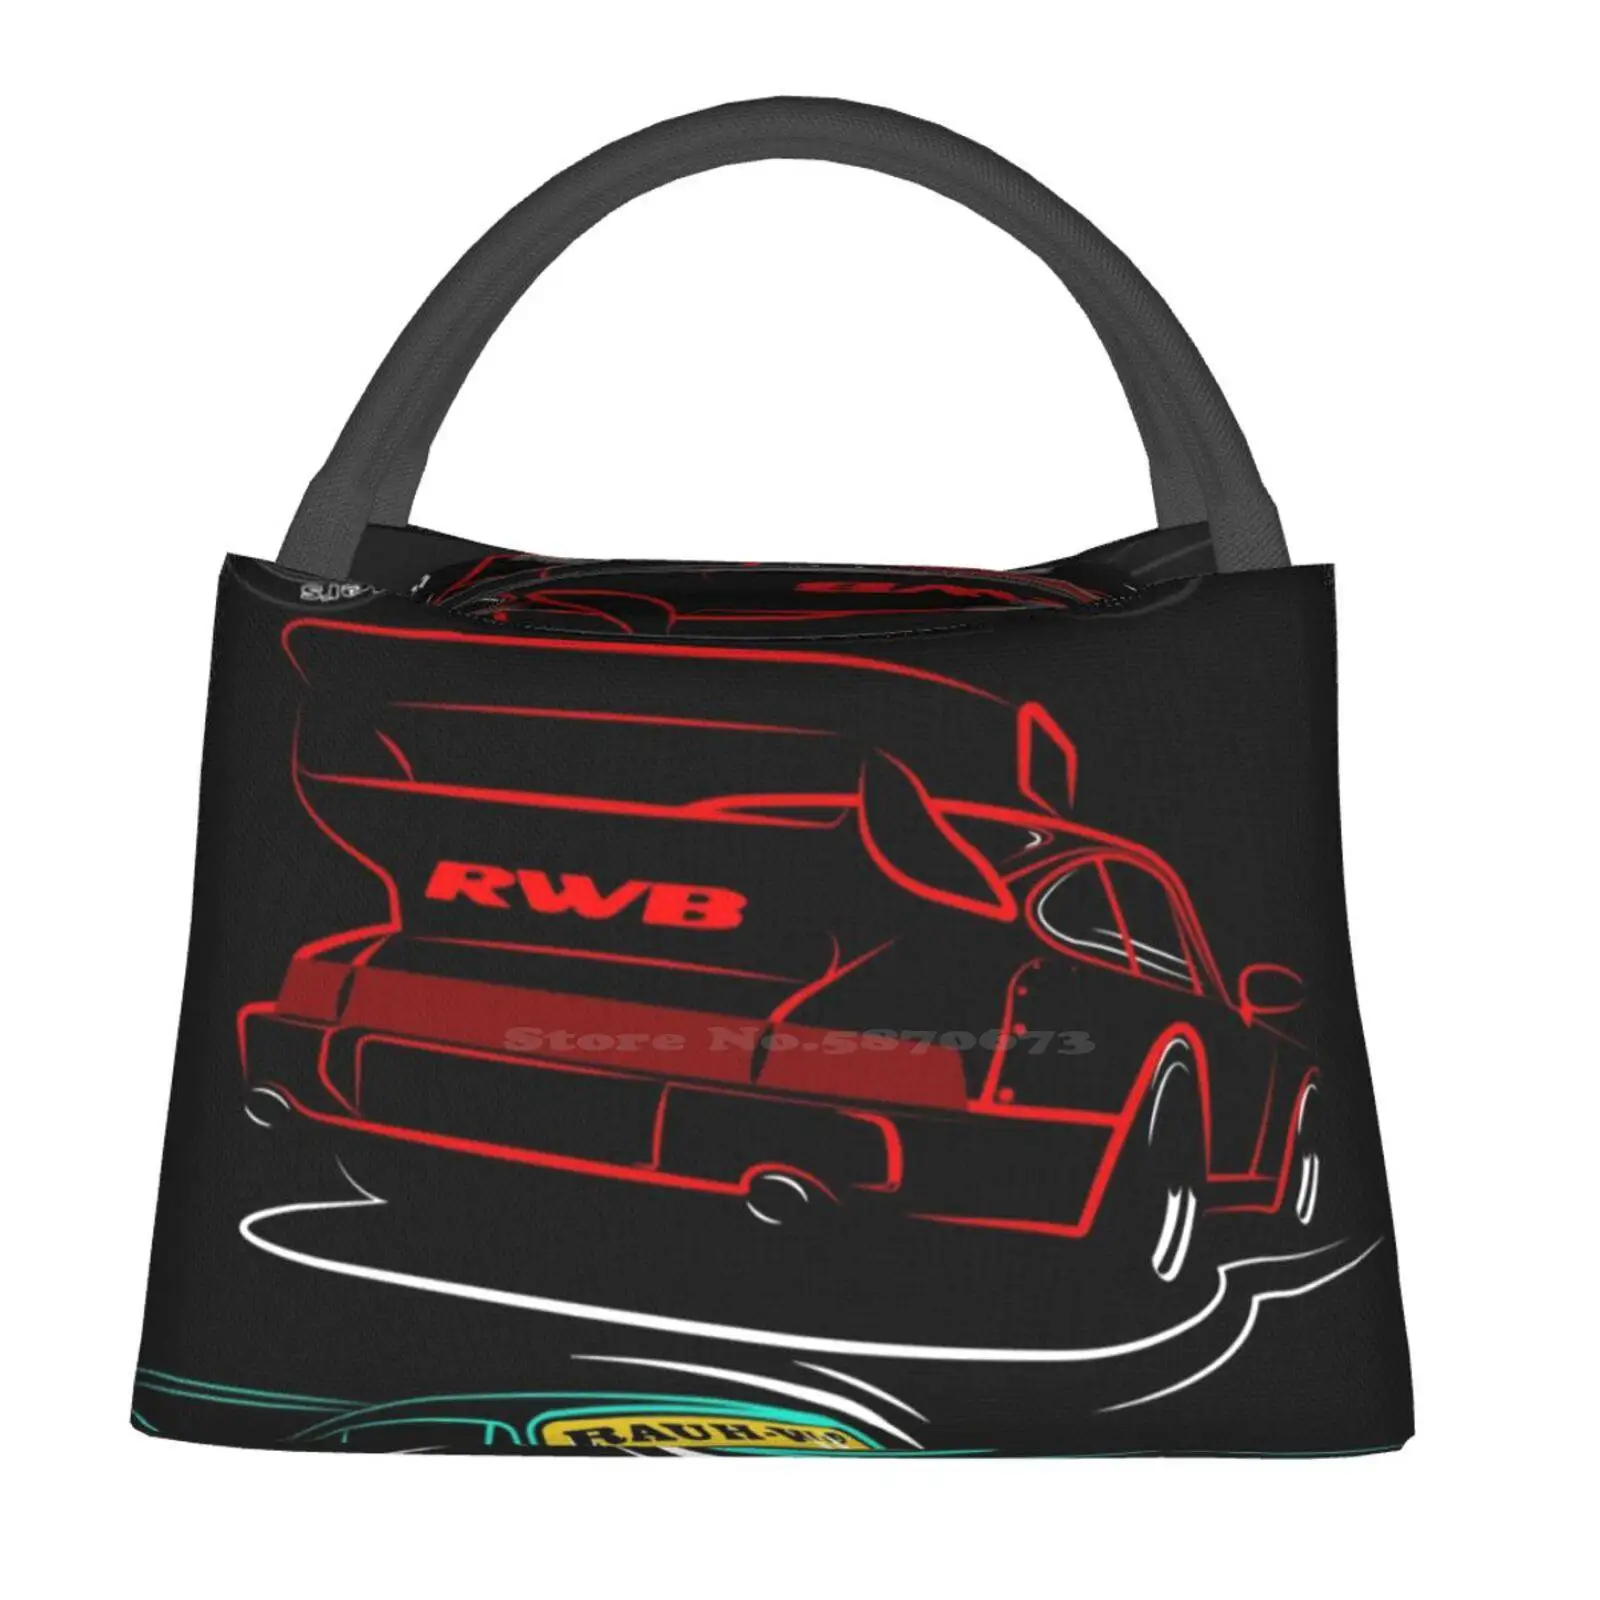 

Widebodies Classic Portable Lunch Bag Insulated Bag Carartist Carart Cardrawing Automotive Automotivearts Carposters Work